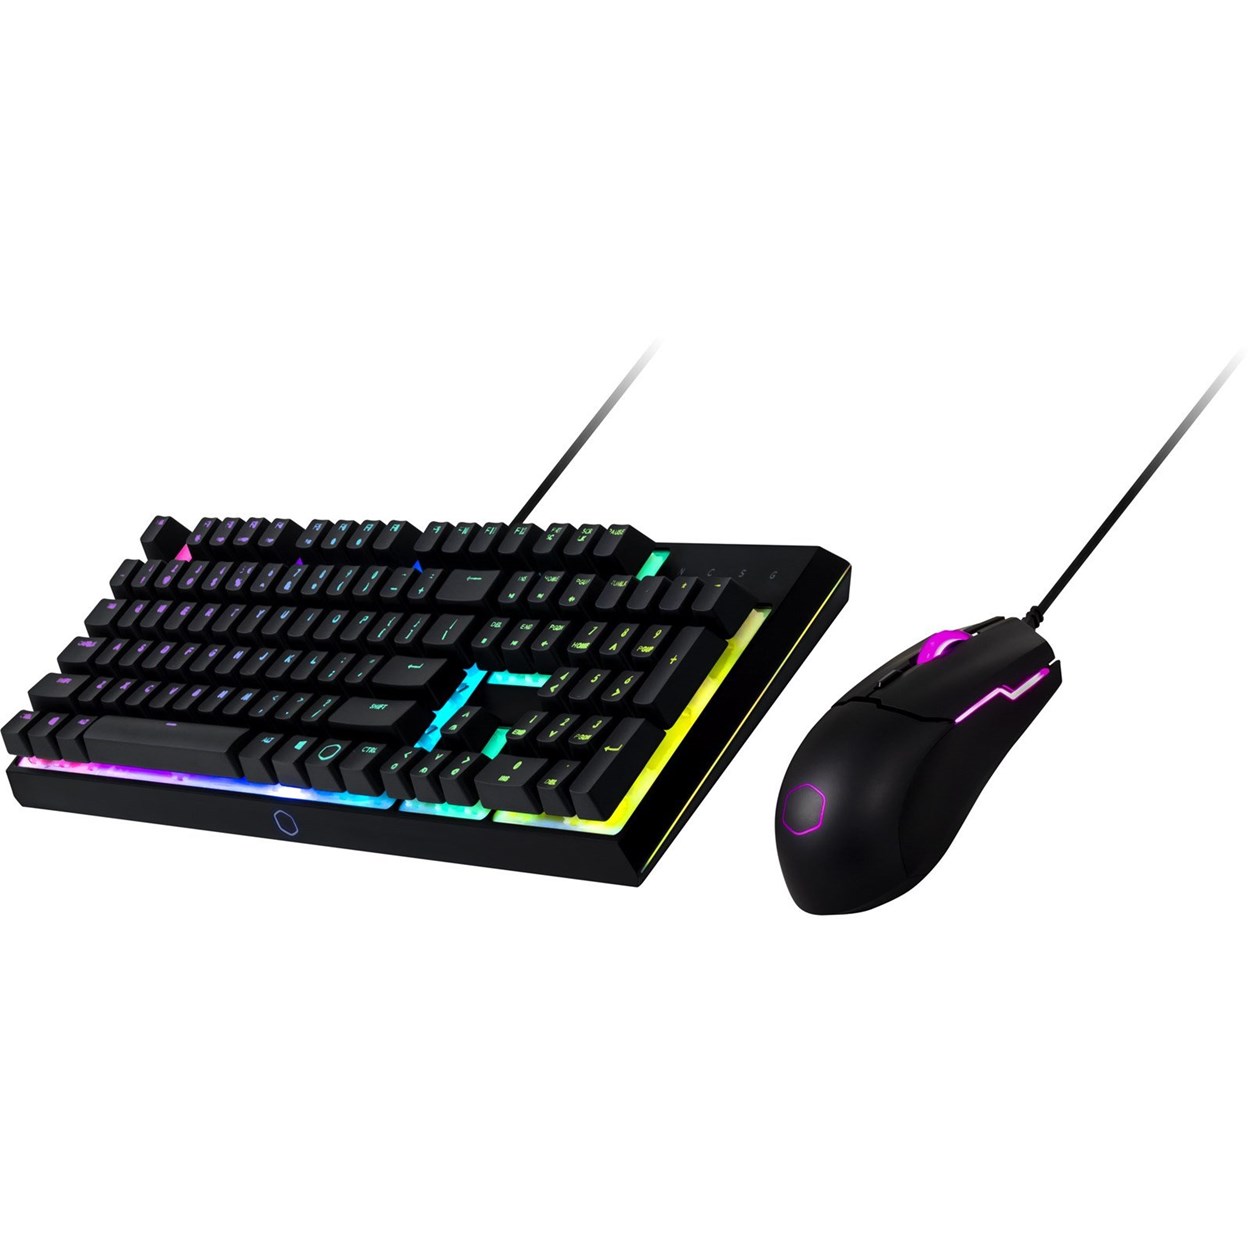 Stocking Filler Gifts For All Ages - MS110 RGB keyboard and Mouse